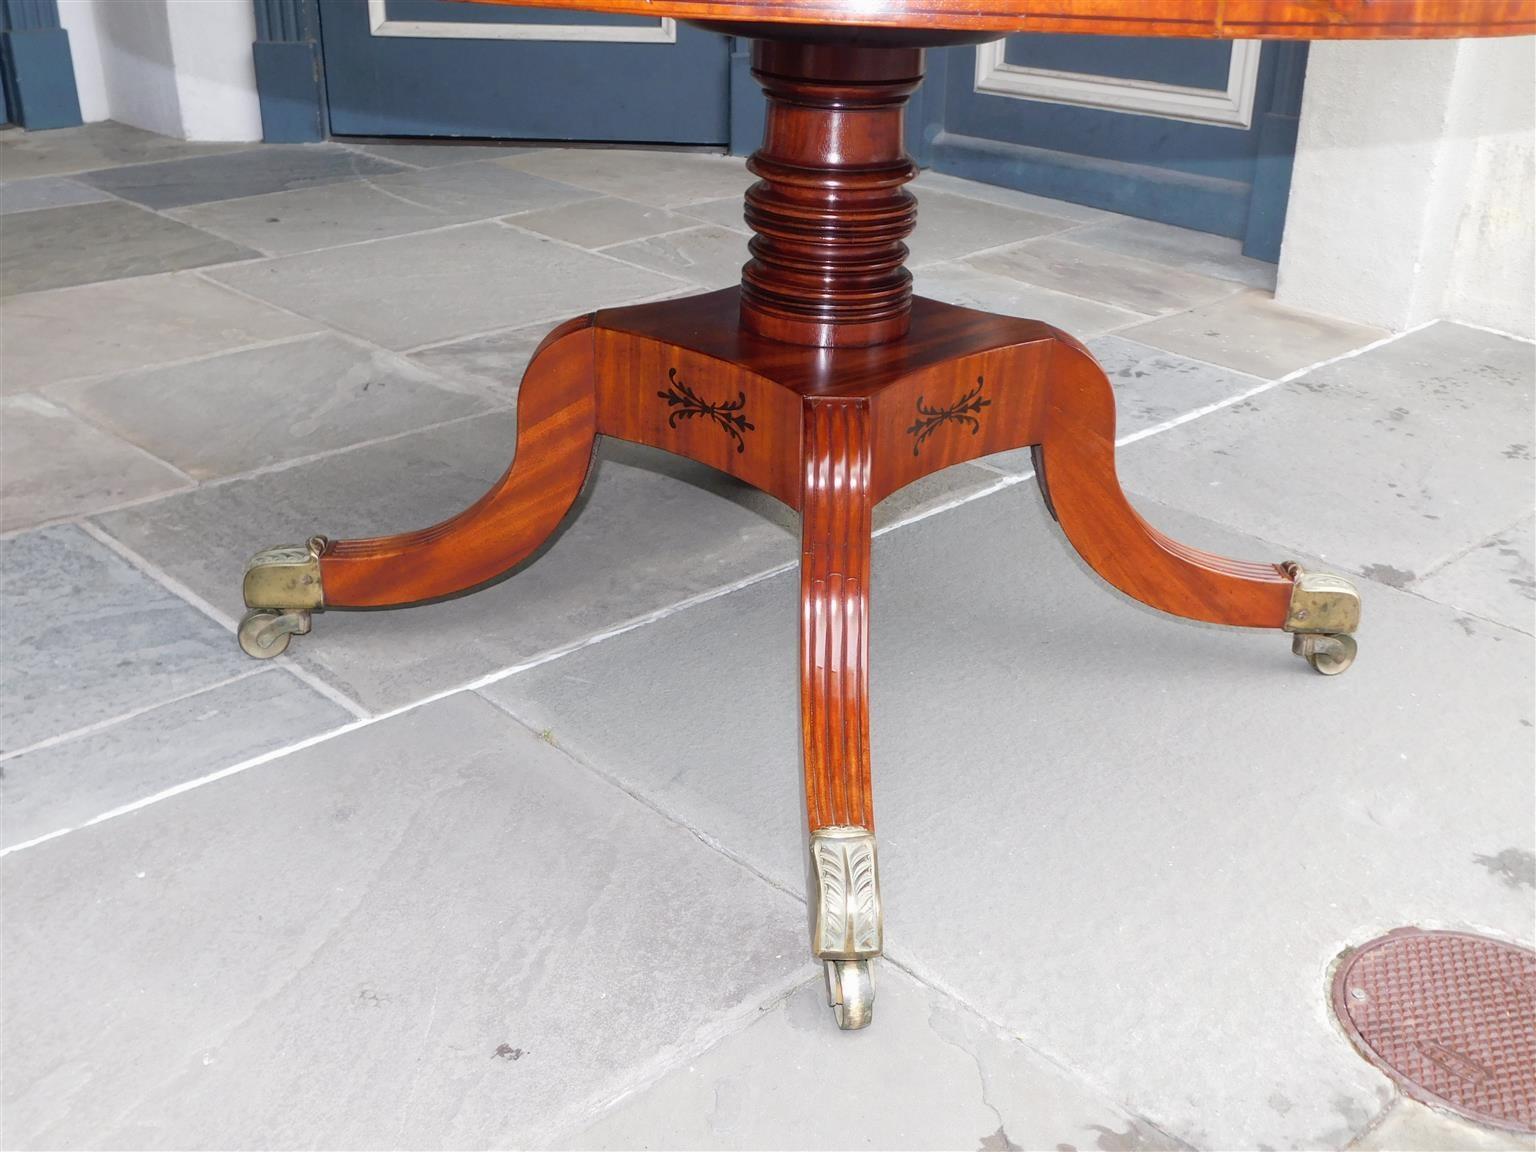 Late 18th Century English Regency Mahogany Leather Top Ebony Inlaid Rent Table, Circa 1790 For Sale